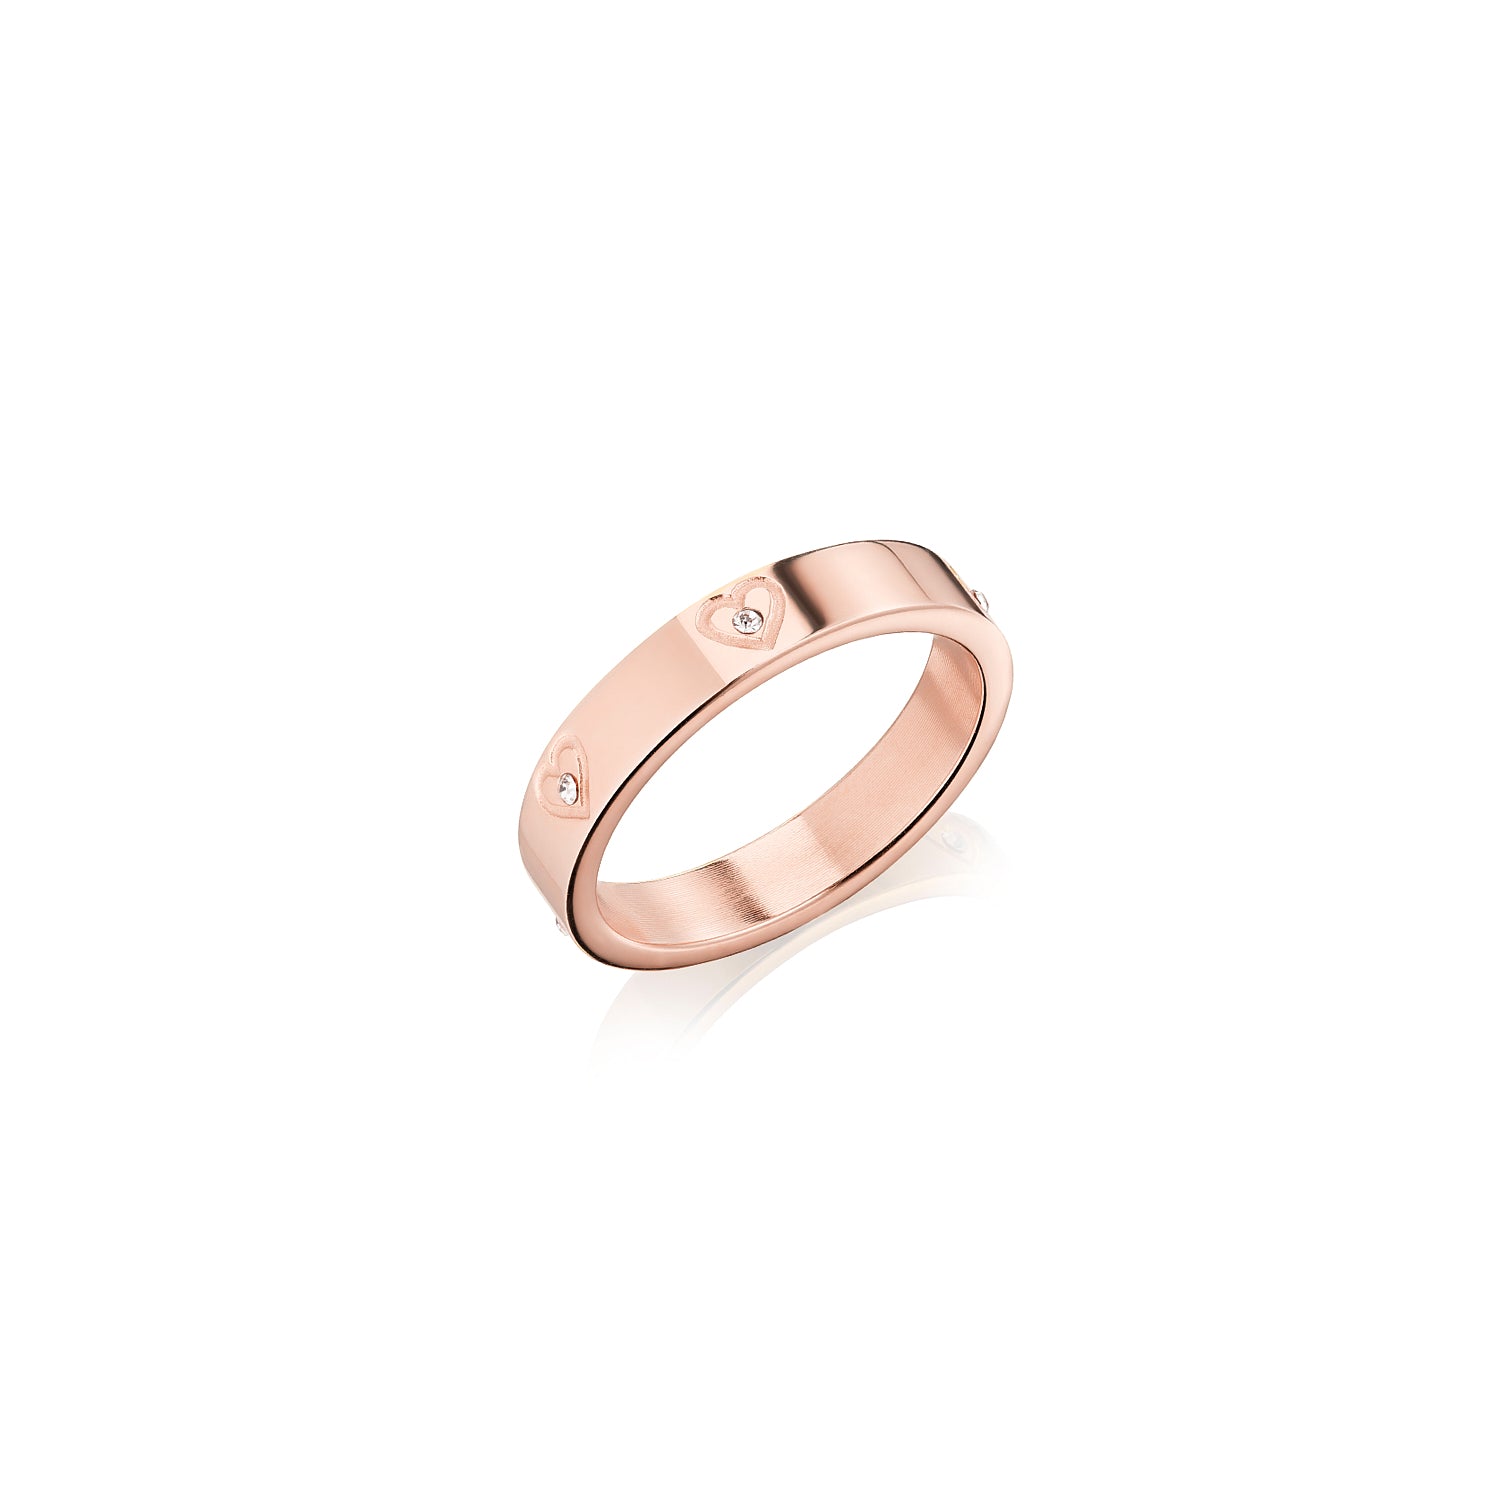 Empreinte Bangle, Pink Gold And Pave Diamonds - Categories